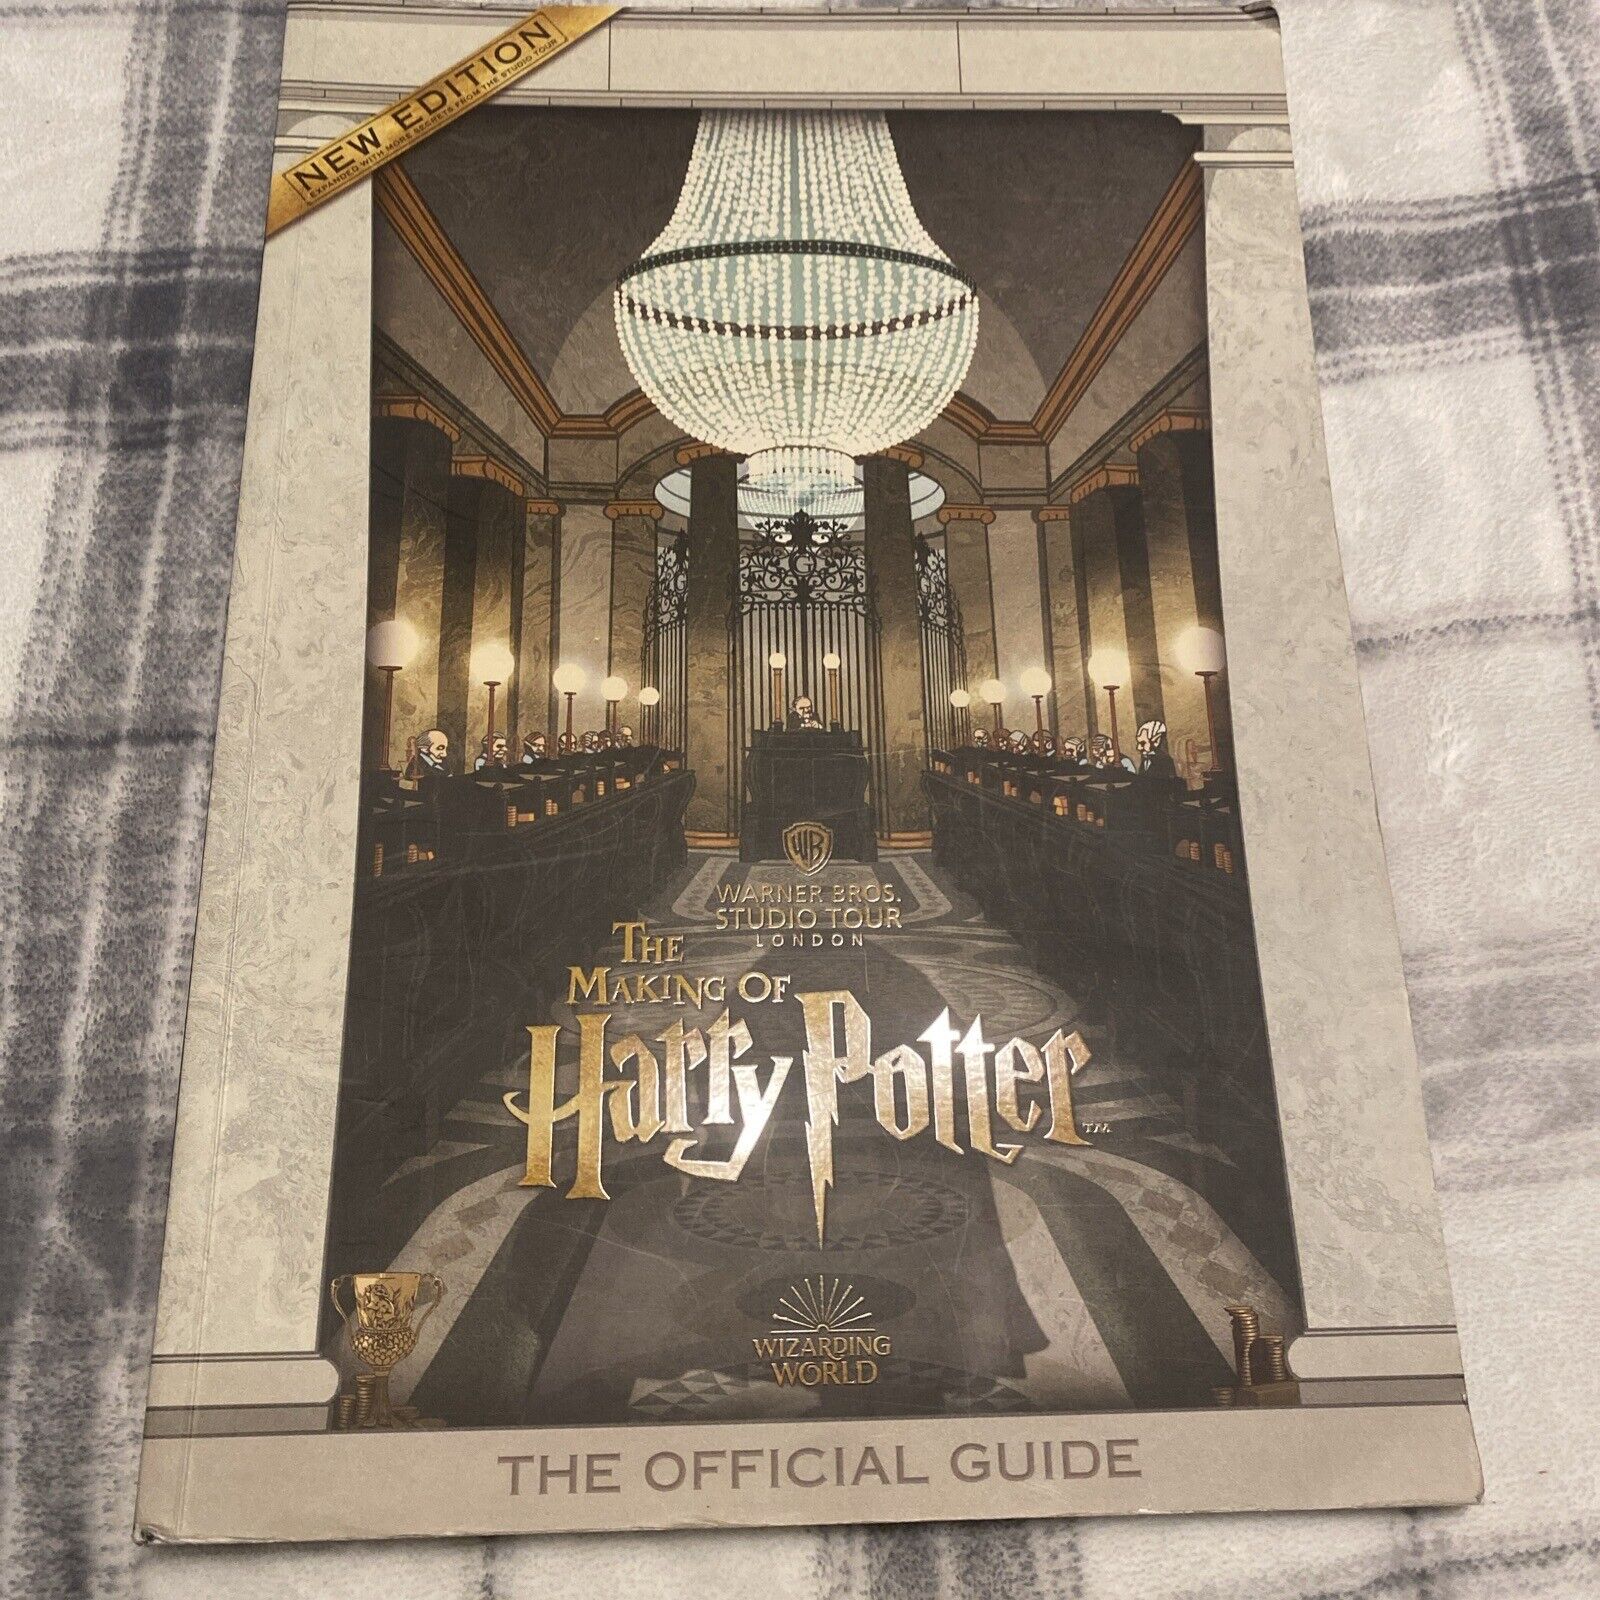 The Making of Harry Potter  Tour London Official Guide 2019, And Weasley Sweater